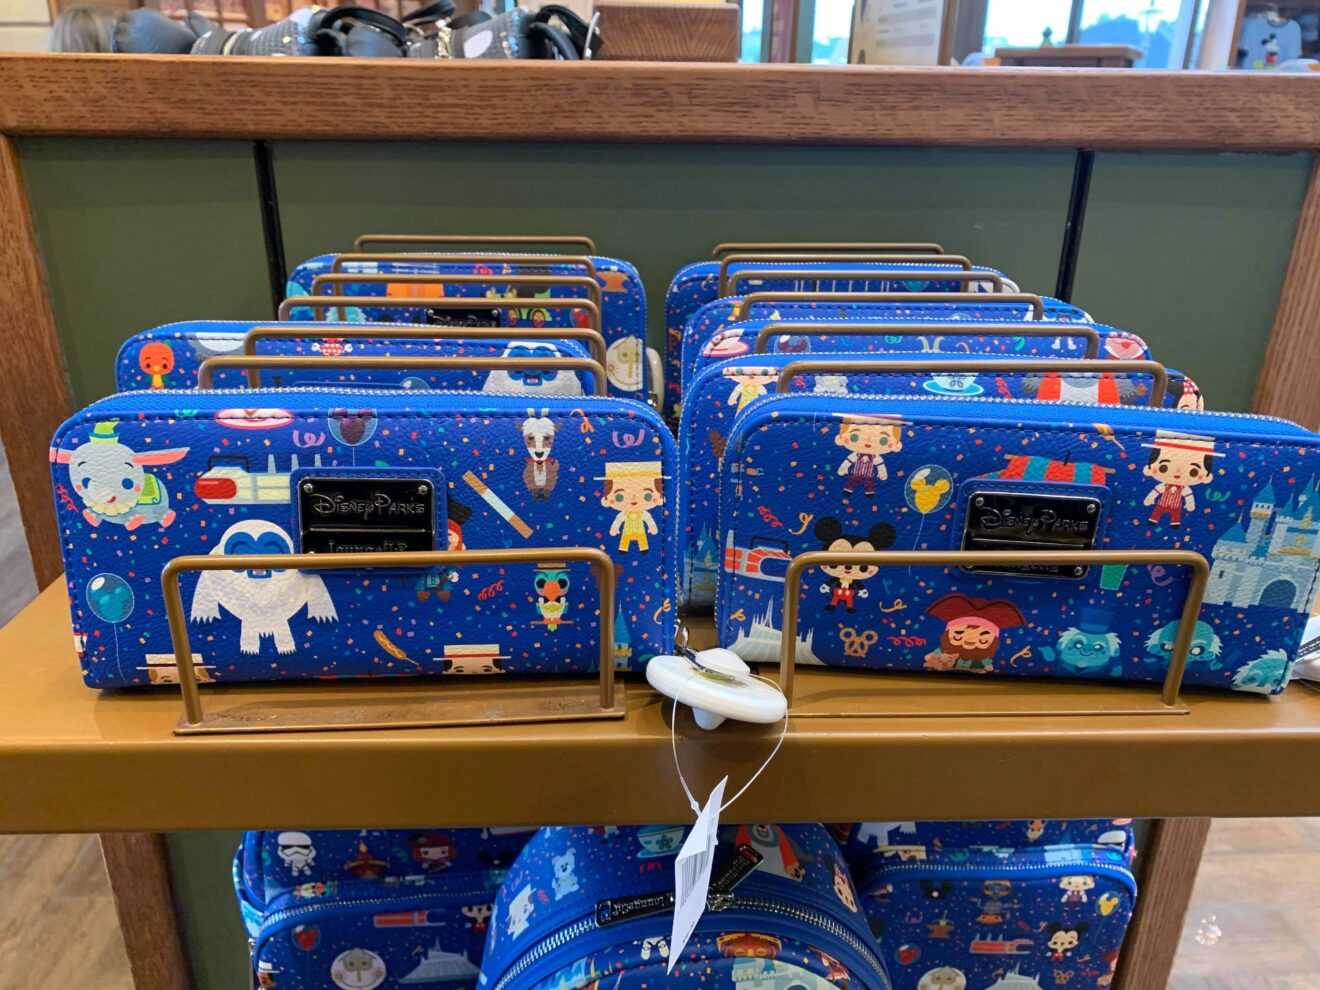 New Disney Parks Loungefly Seen at Epcot Chip and Company